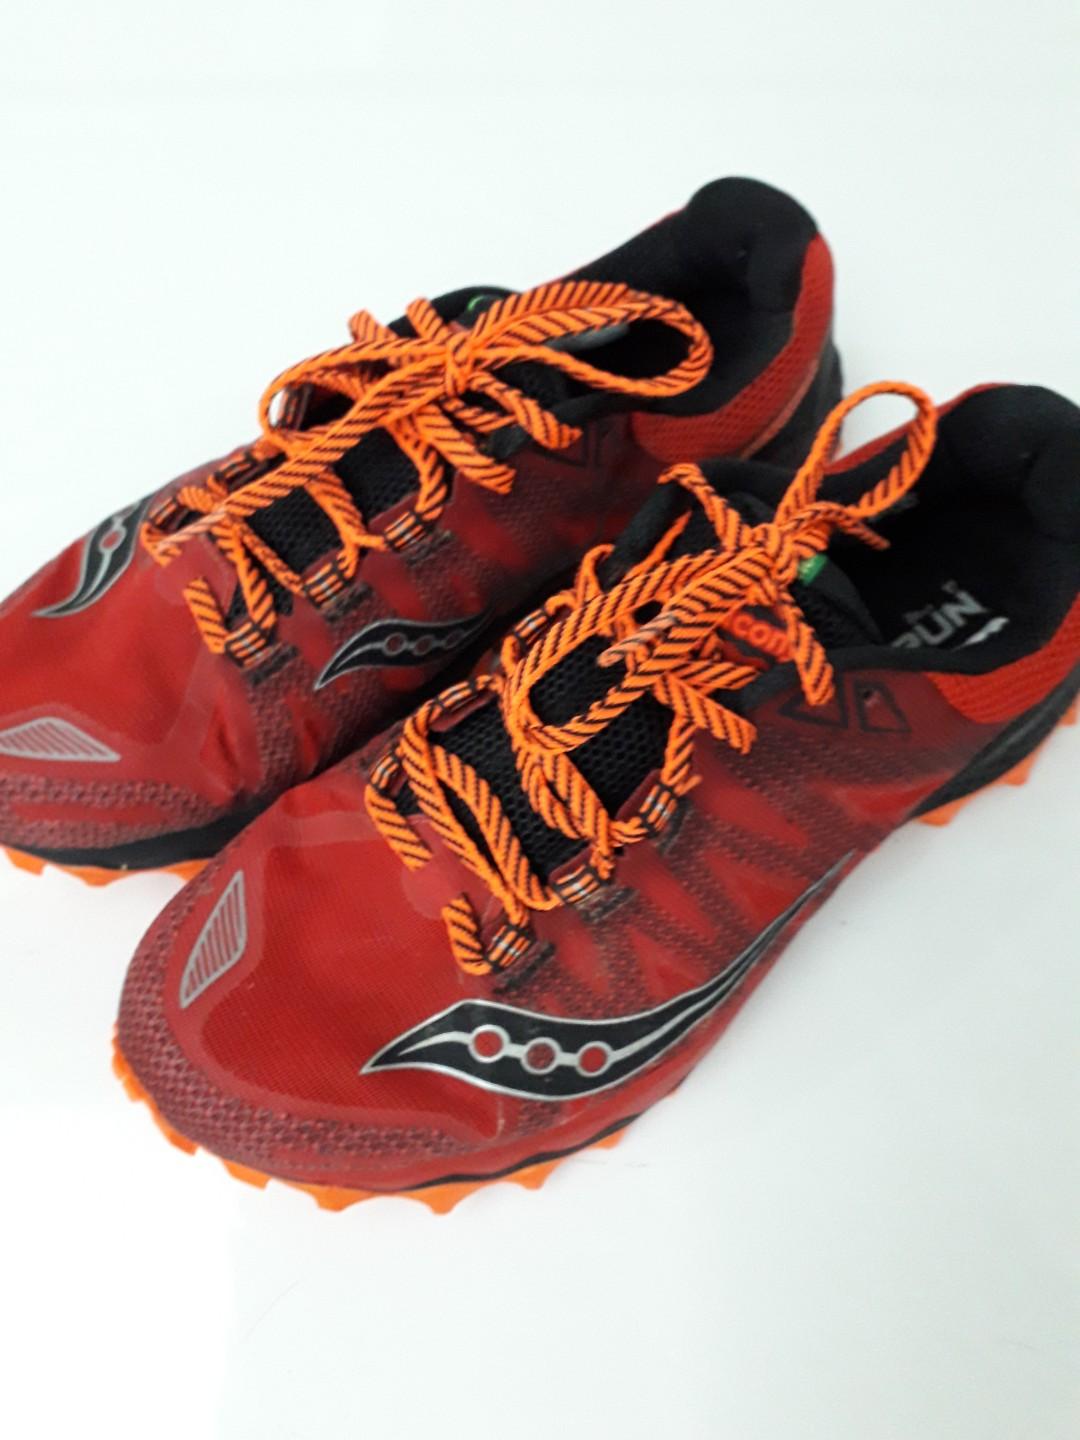 Saucony Everun trail running shoes in 